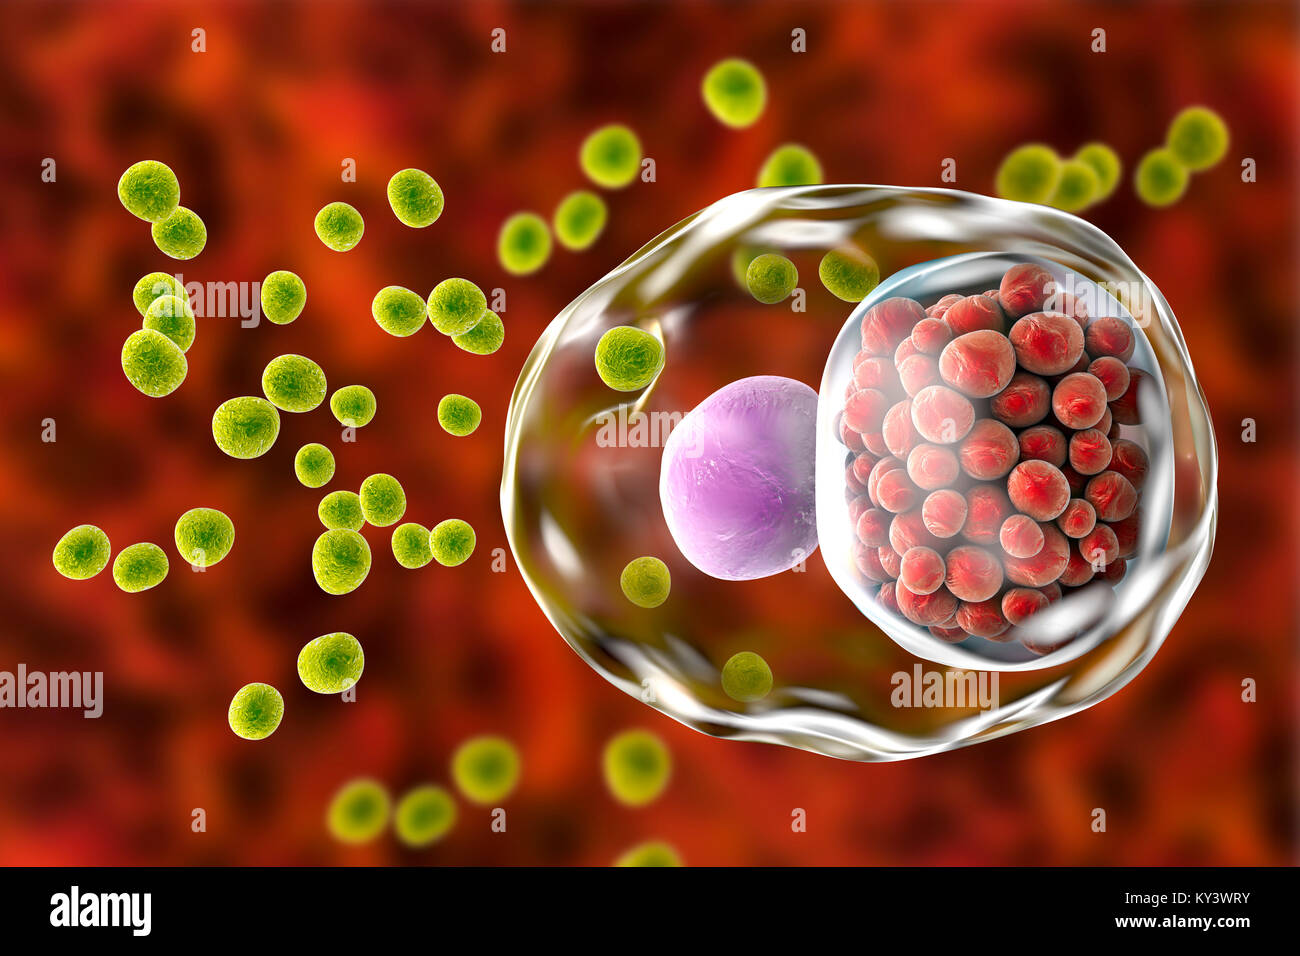 Chlamydia infection. Computer illustration of a cell infected with Chlamydia trachomatis bacteria. Elementary bodies (EBs, small green spheres), the non-replicating infectious form of the bacteria are seen outside the host cell. EBs infect the cell and are transformed into reticulate bodies (RB), which are replicating form. RBs are seen as a group of small red spheres near the nucleus (purple) of the cell. Chlamydia is a sexually transmitted infection that can go undetected causing infertility. It also causes the eye disease trachoma, which can lead to blindness. Stock Photo